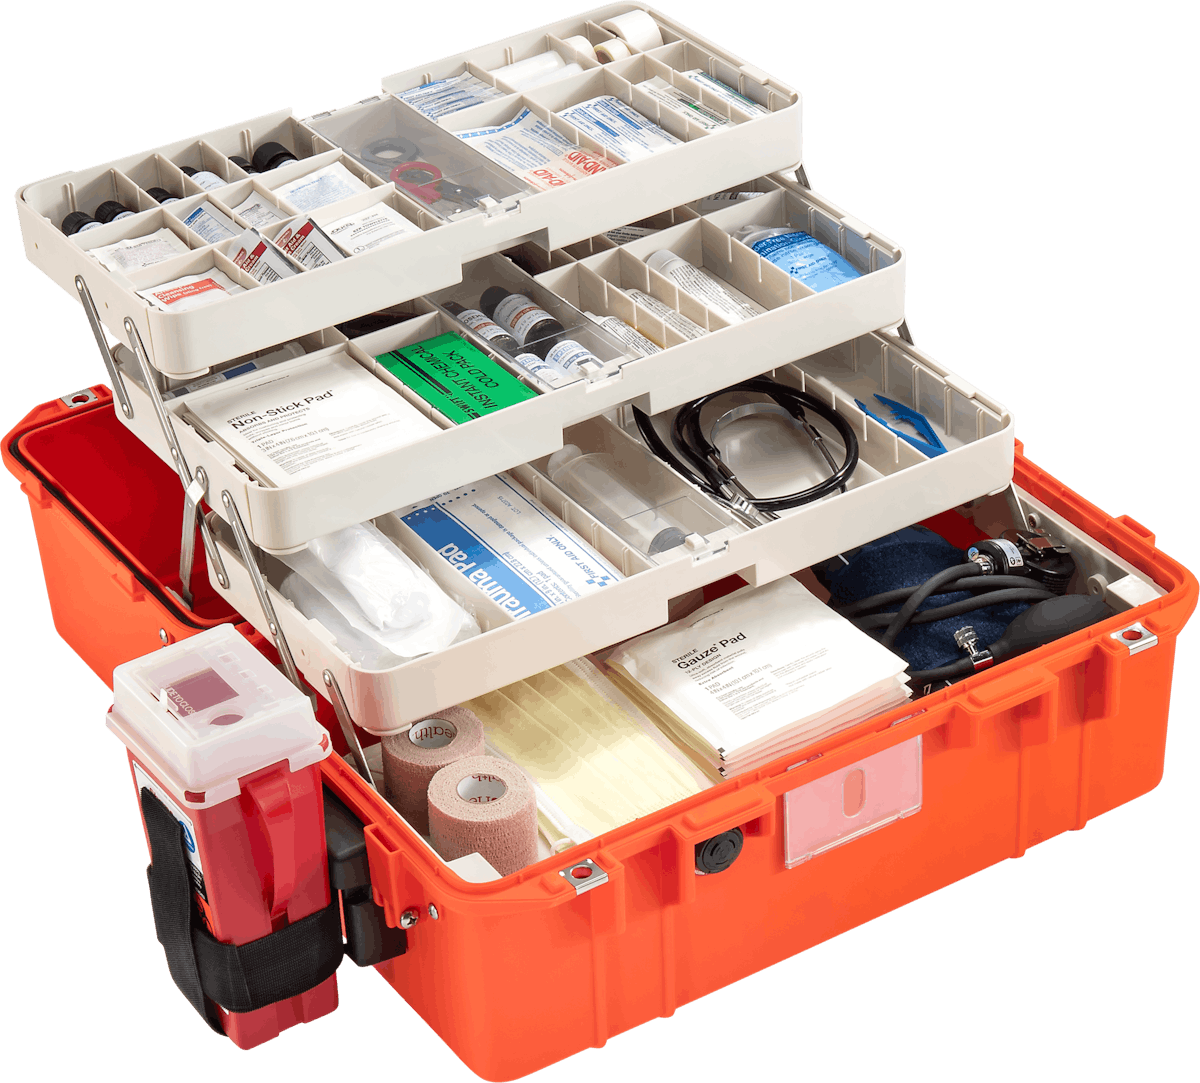 Pelican Introduces New Medication Case for First Responders